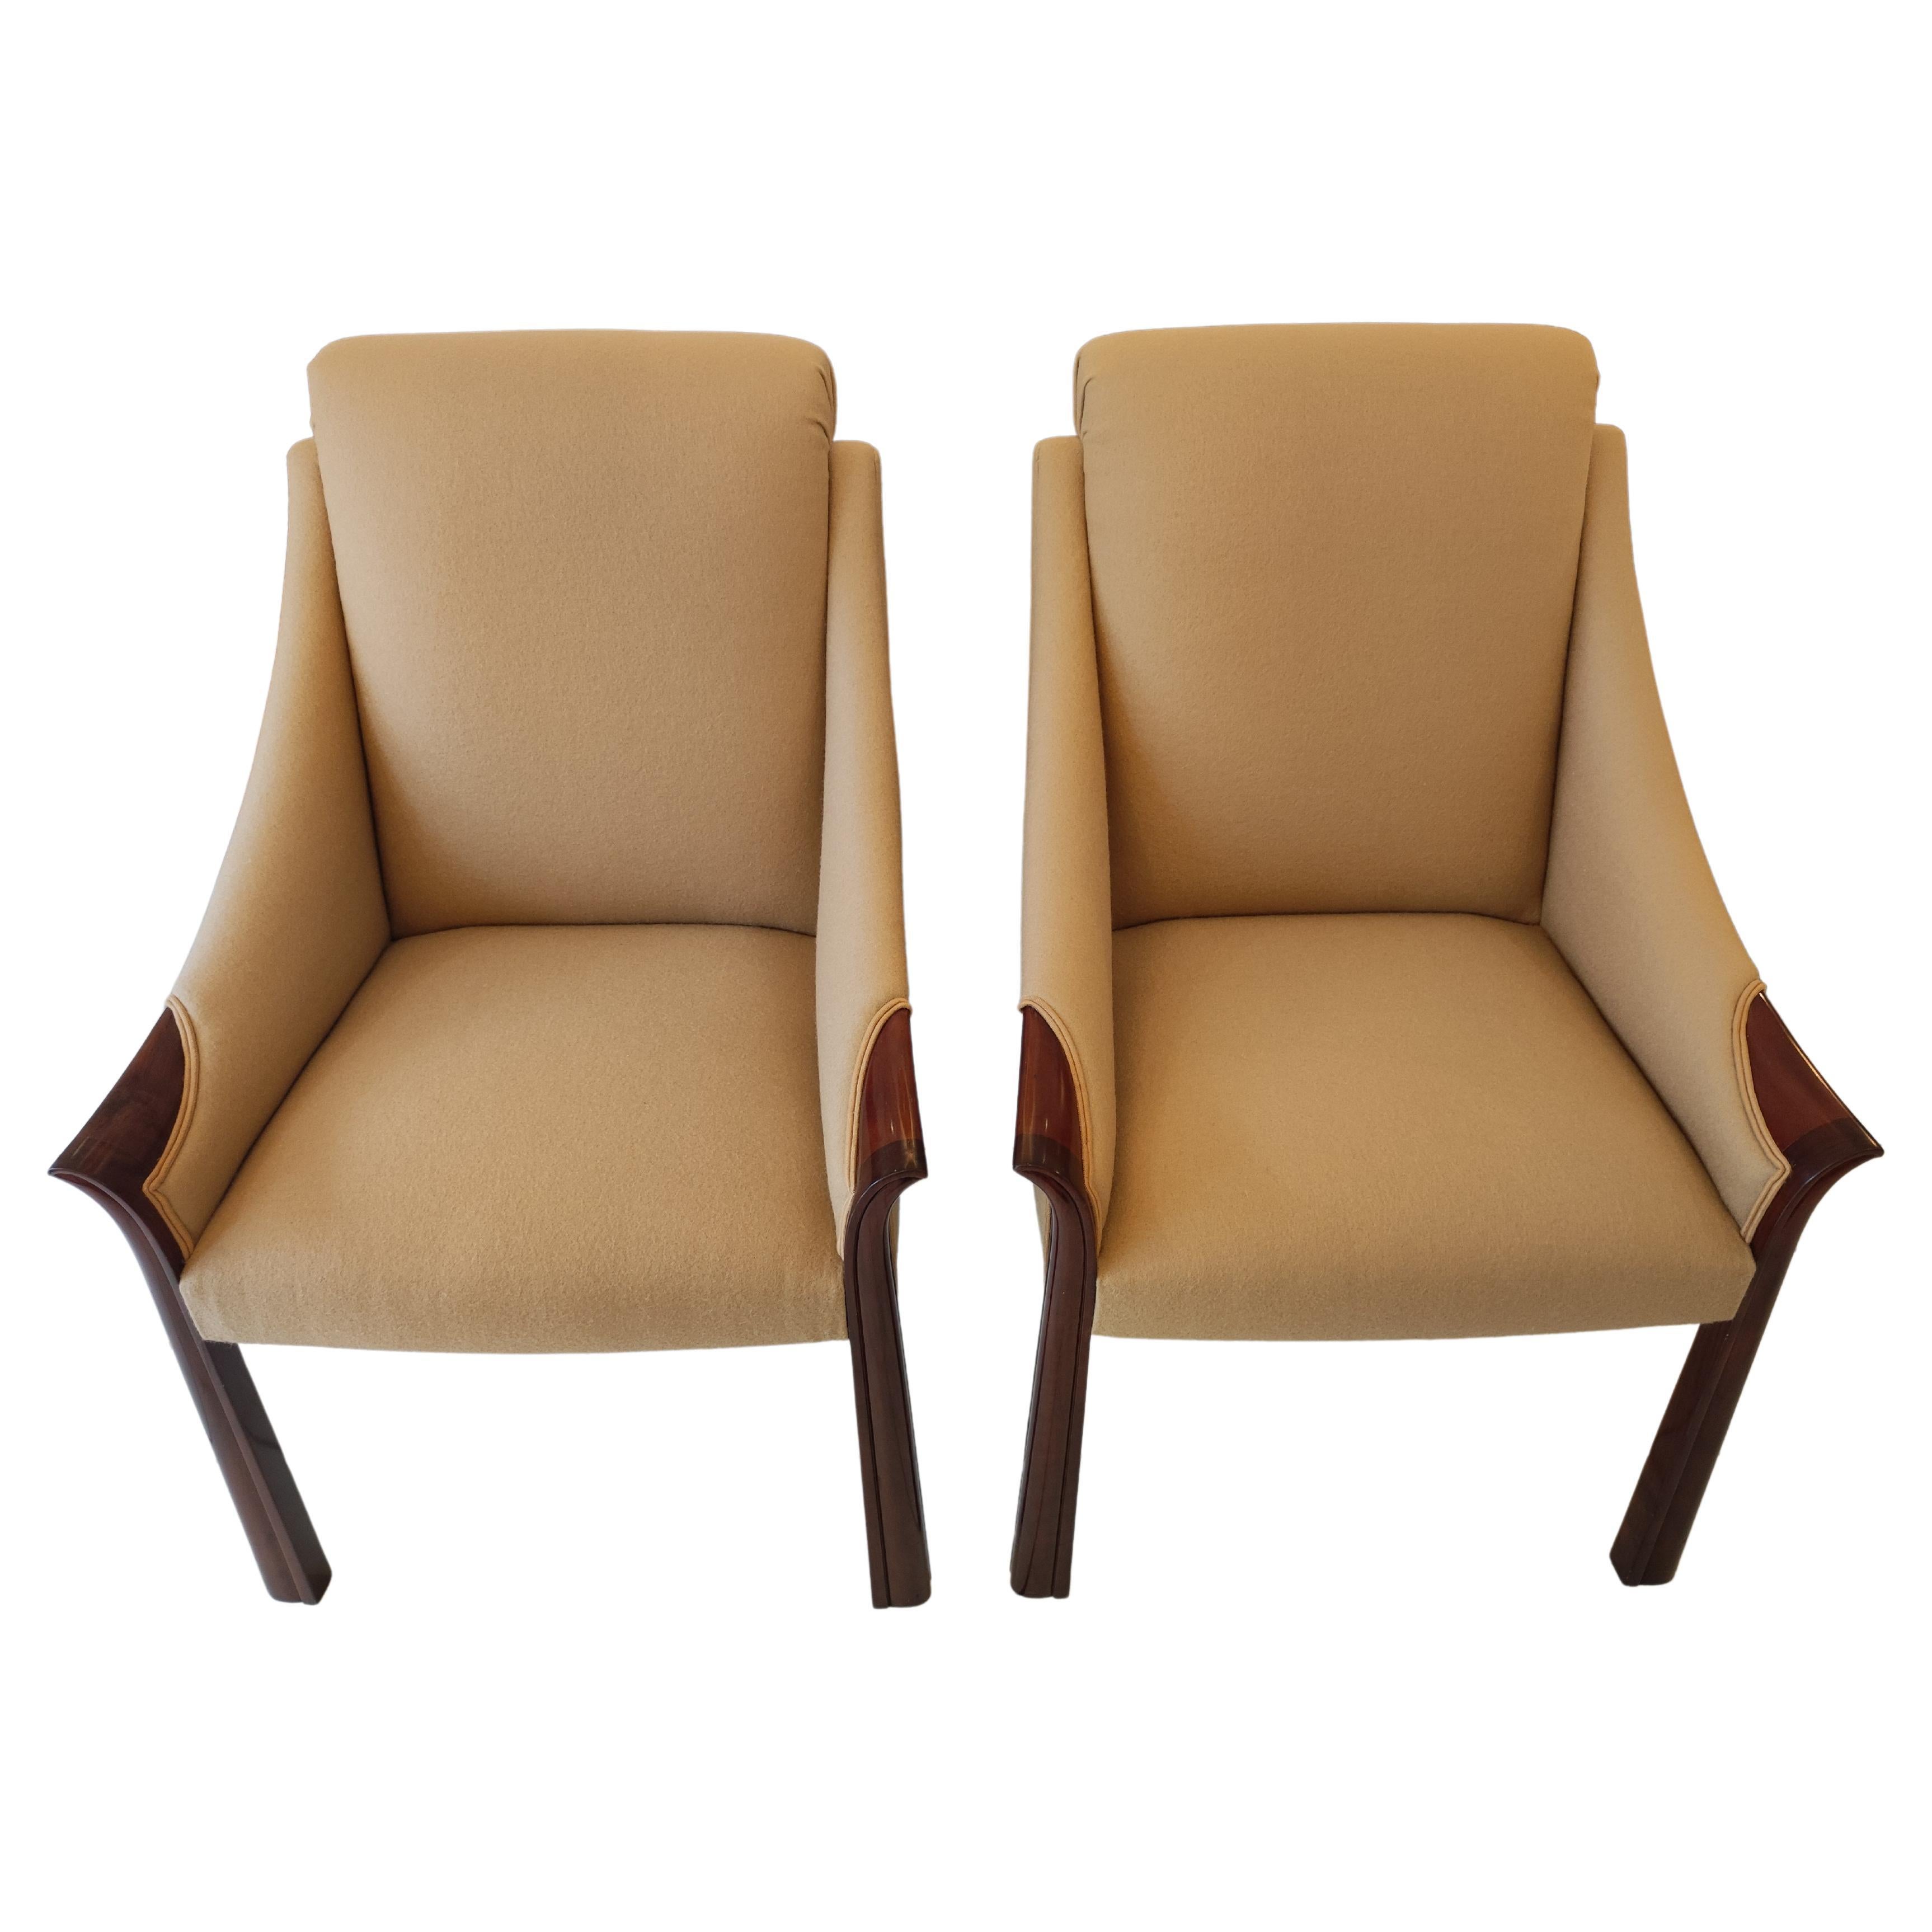 Pair of Moret Chairs, circa 1930 For Sale